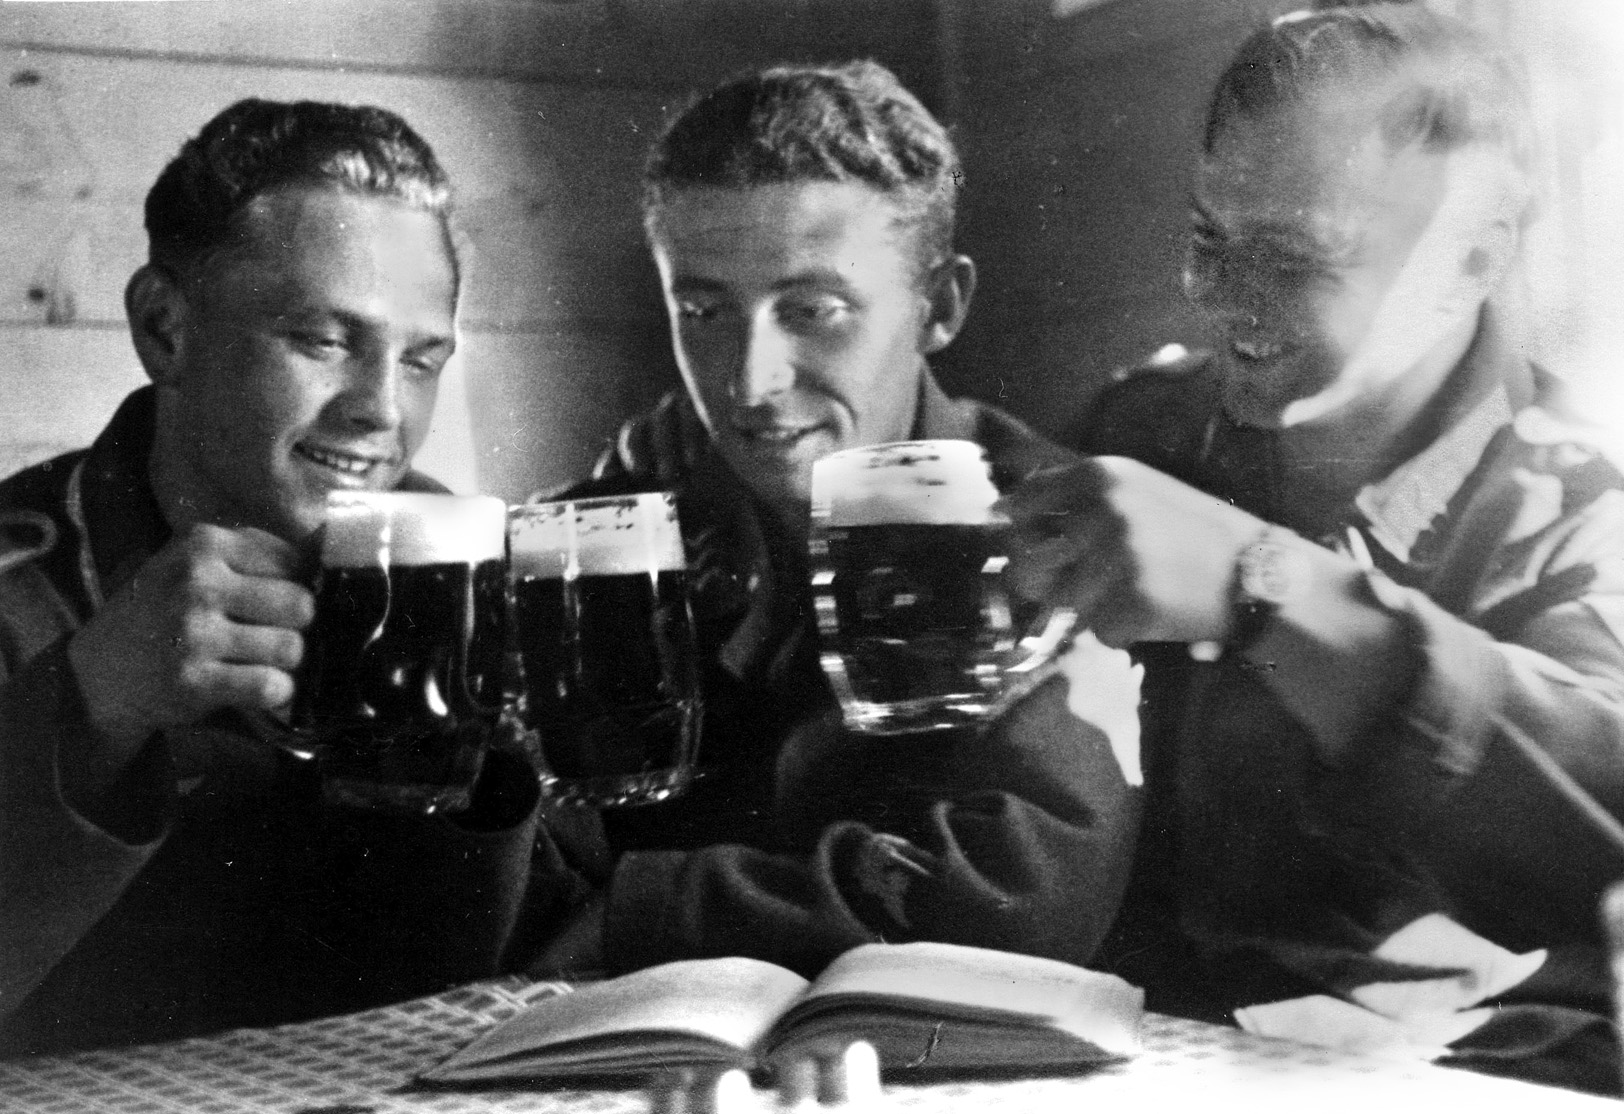 During the prewar Nazi era years, German civilian consumption of beer, already one of the highest in Europe, rose by 25 percent. Beer was also a staple beverage of the German armed forces through the war years. Hitler abstained from alcohol and was known to drink distilled water. Himmler also frowned on drinking and made it a punishable offense within the ranks of the SS if taken to excess.